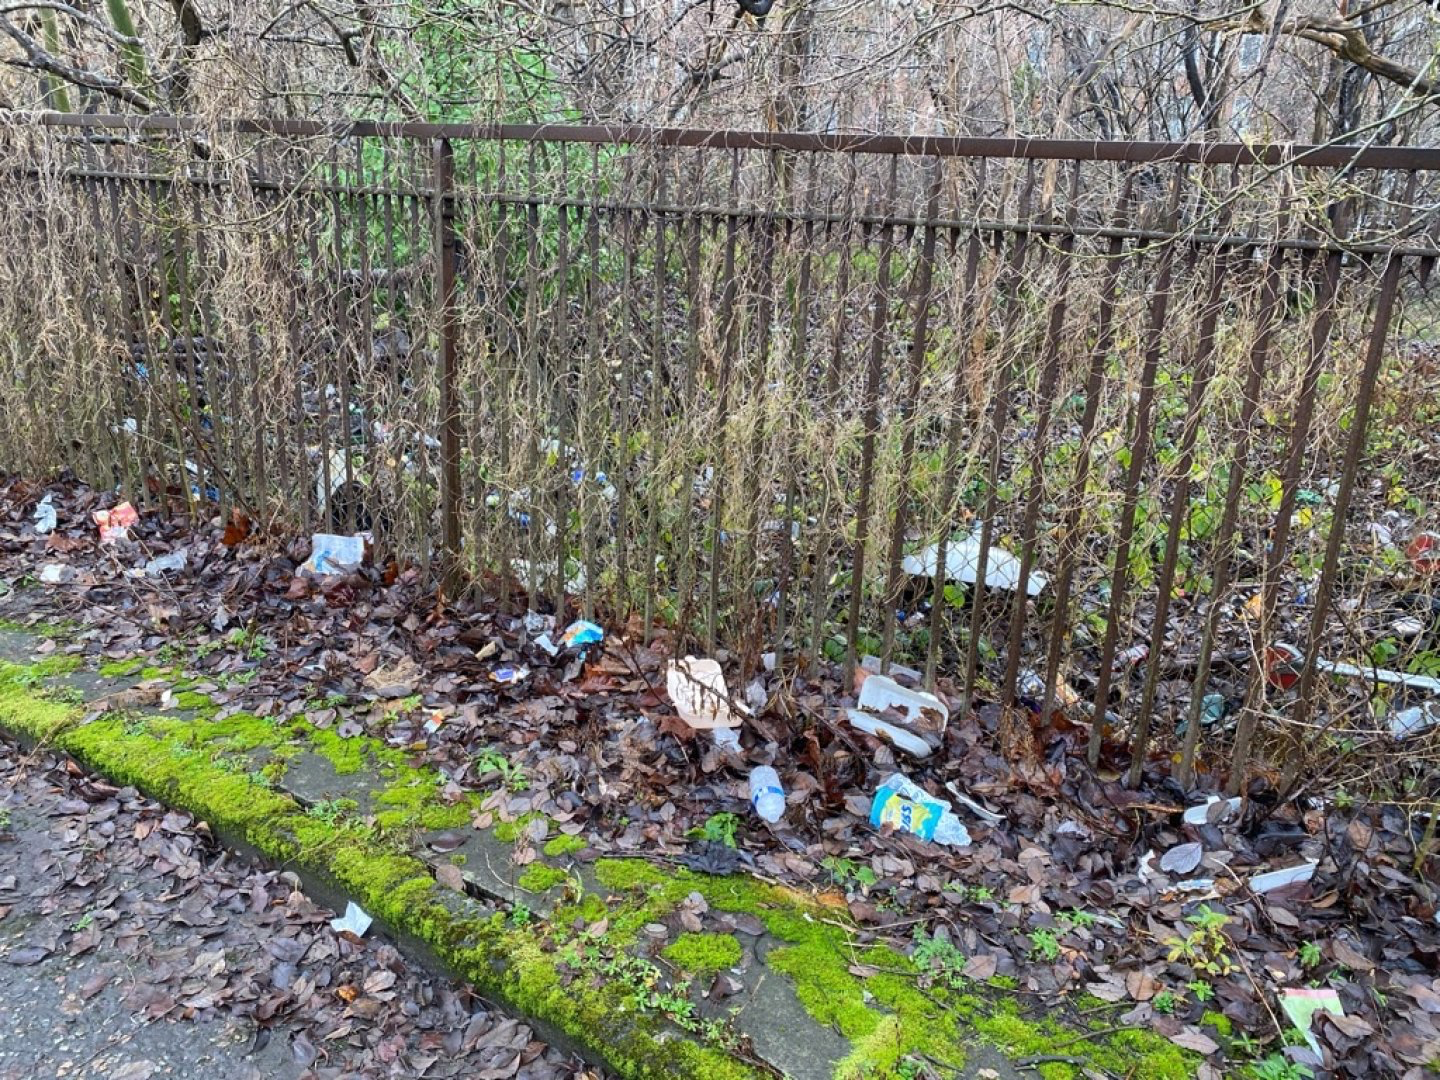 iron fence, trees, with trash scattered amongst the leaves on the ground